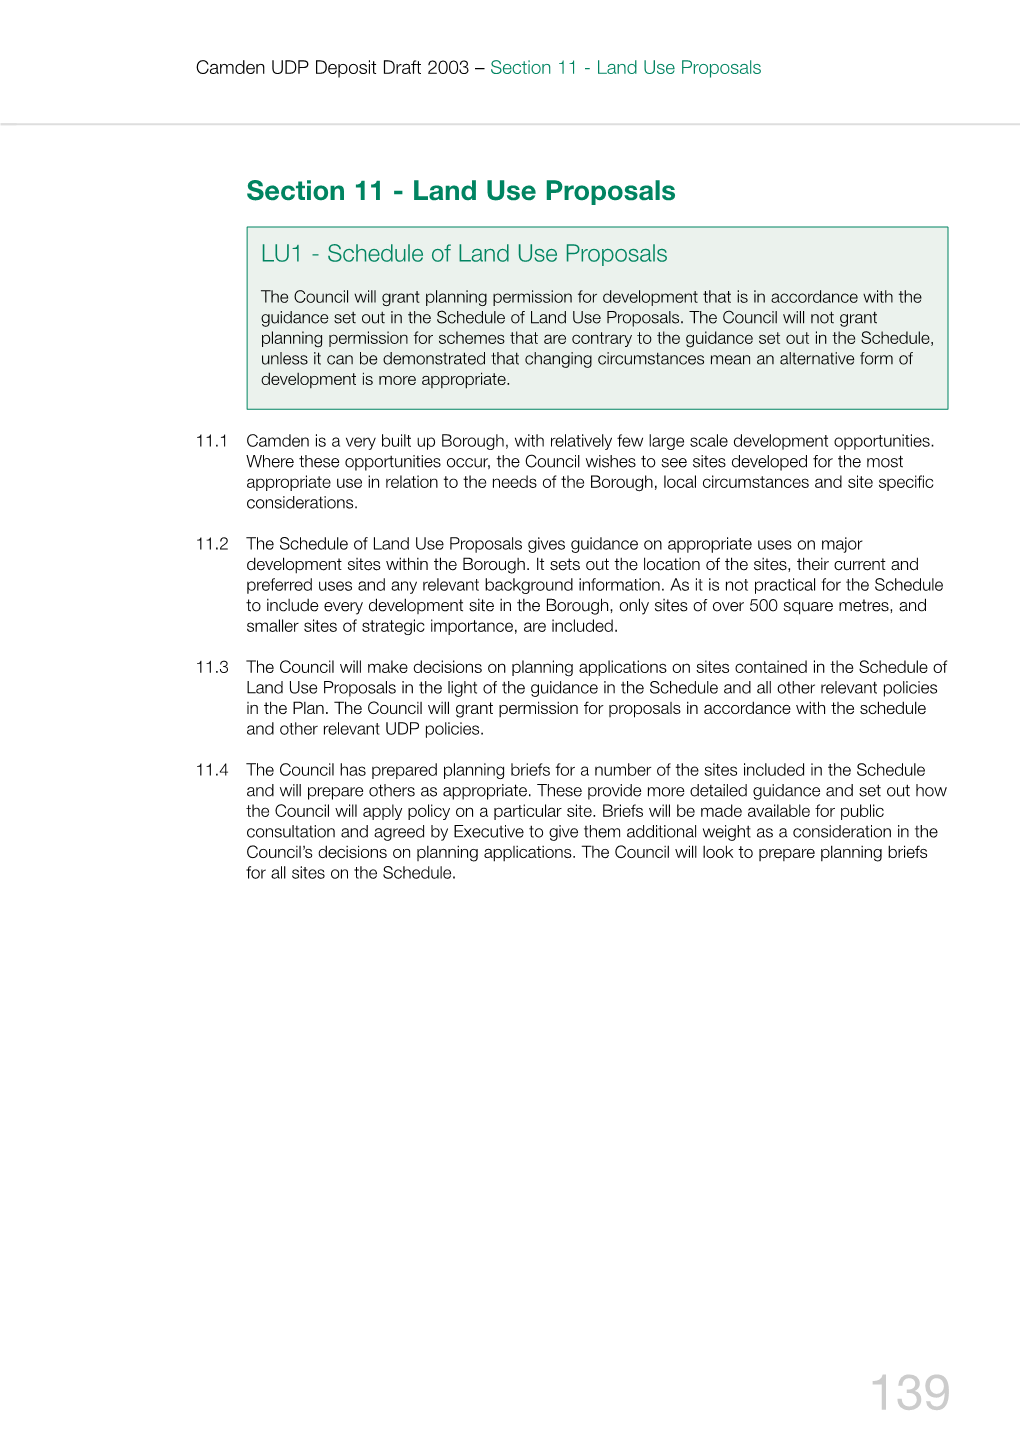 Section 11 - Land Use Proposals